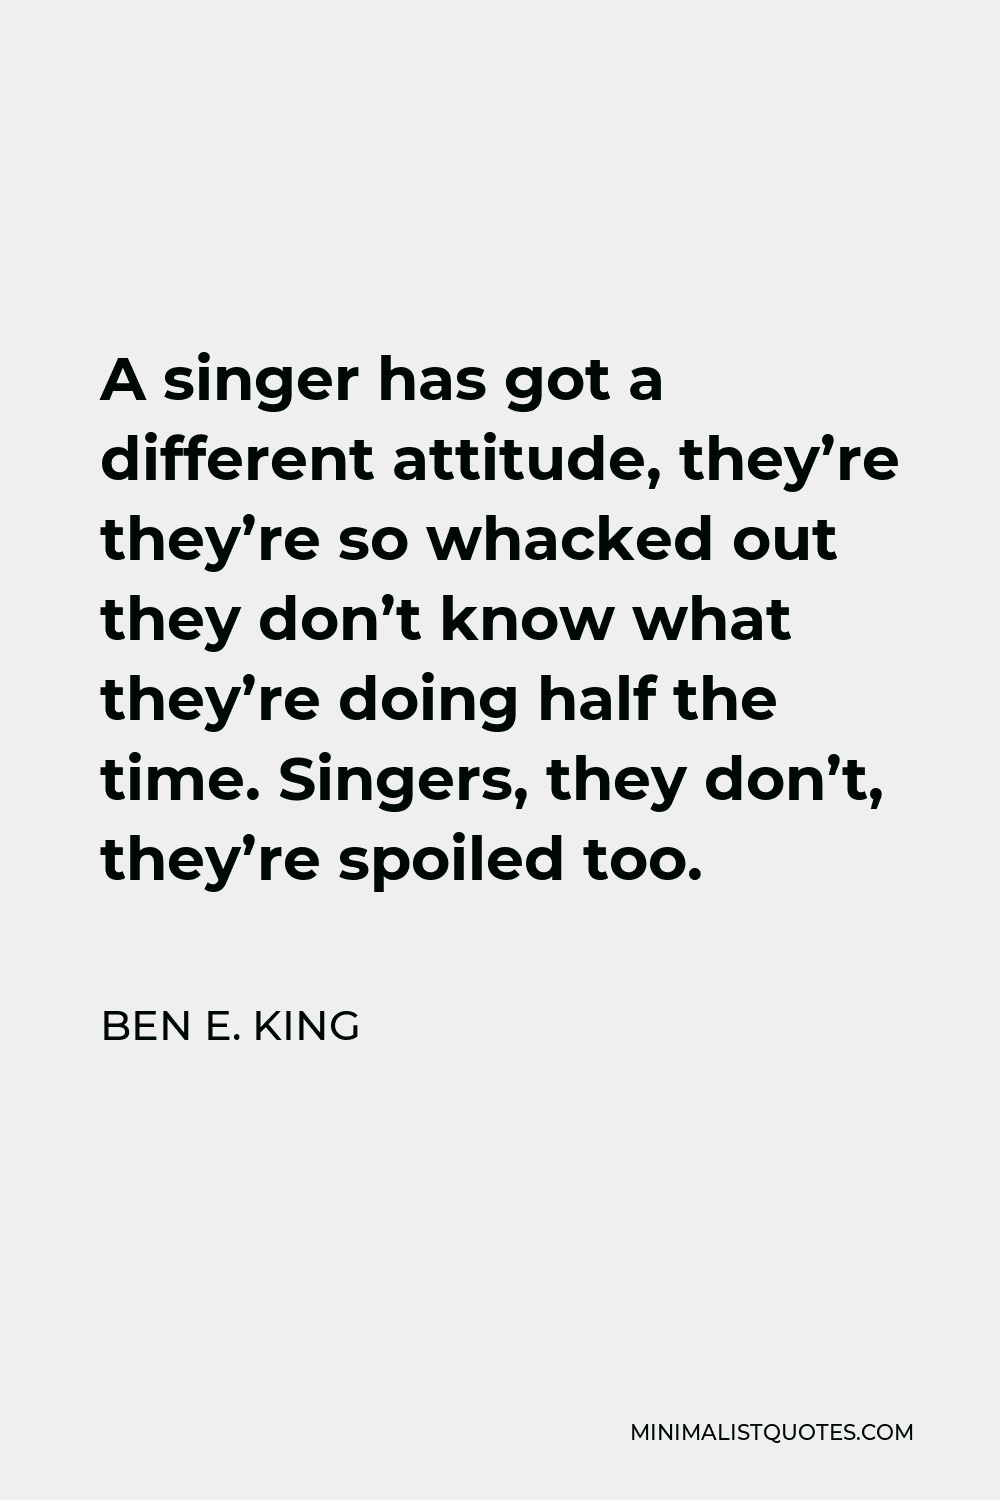 Ben E. King Quote - A singer has got a different attitude, they’re they’re so whacked out they don’t know what they’re doing half the time. Singers, they don’t, they’re spoiled too.